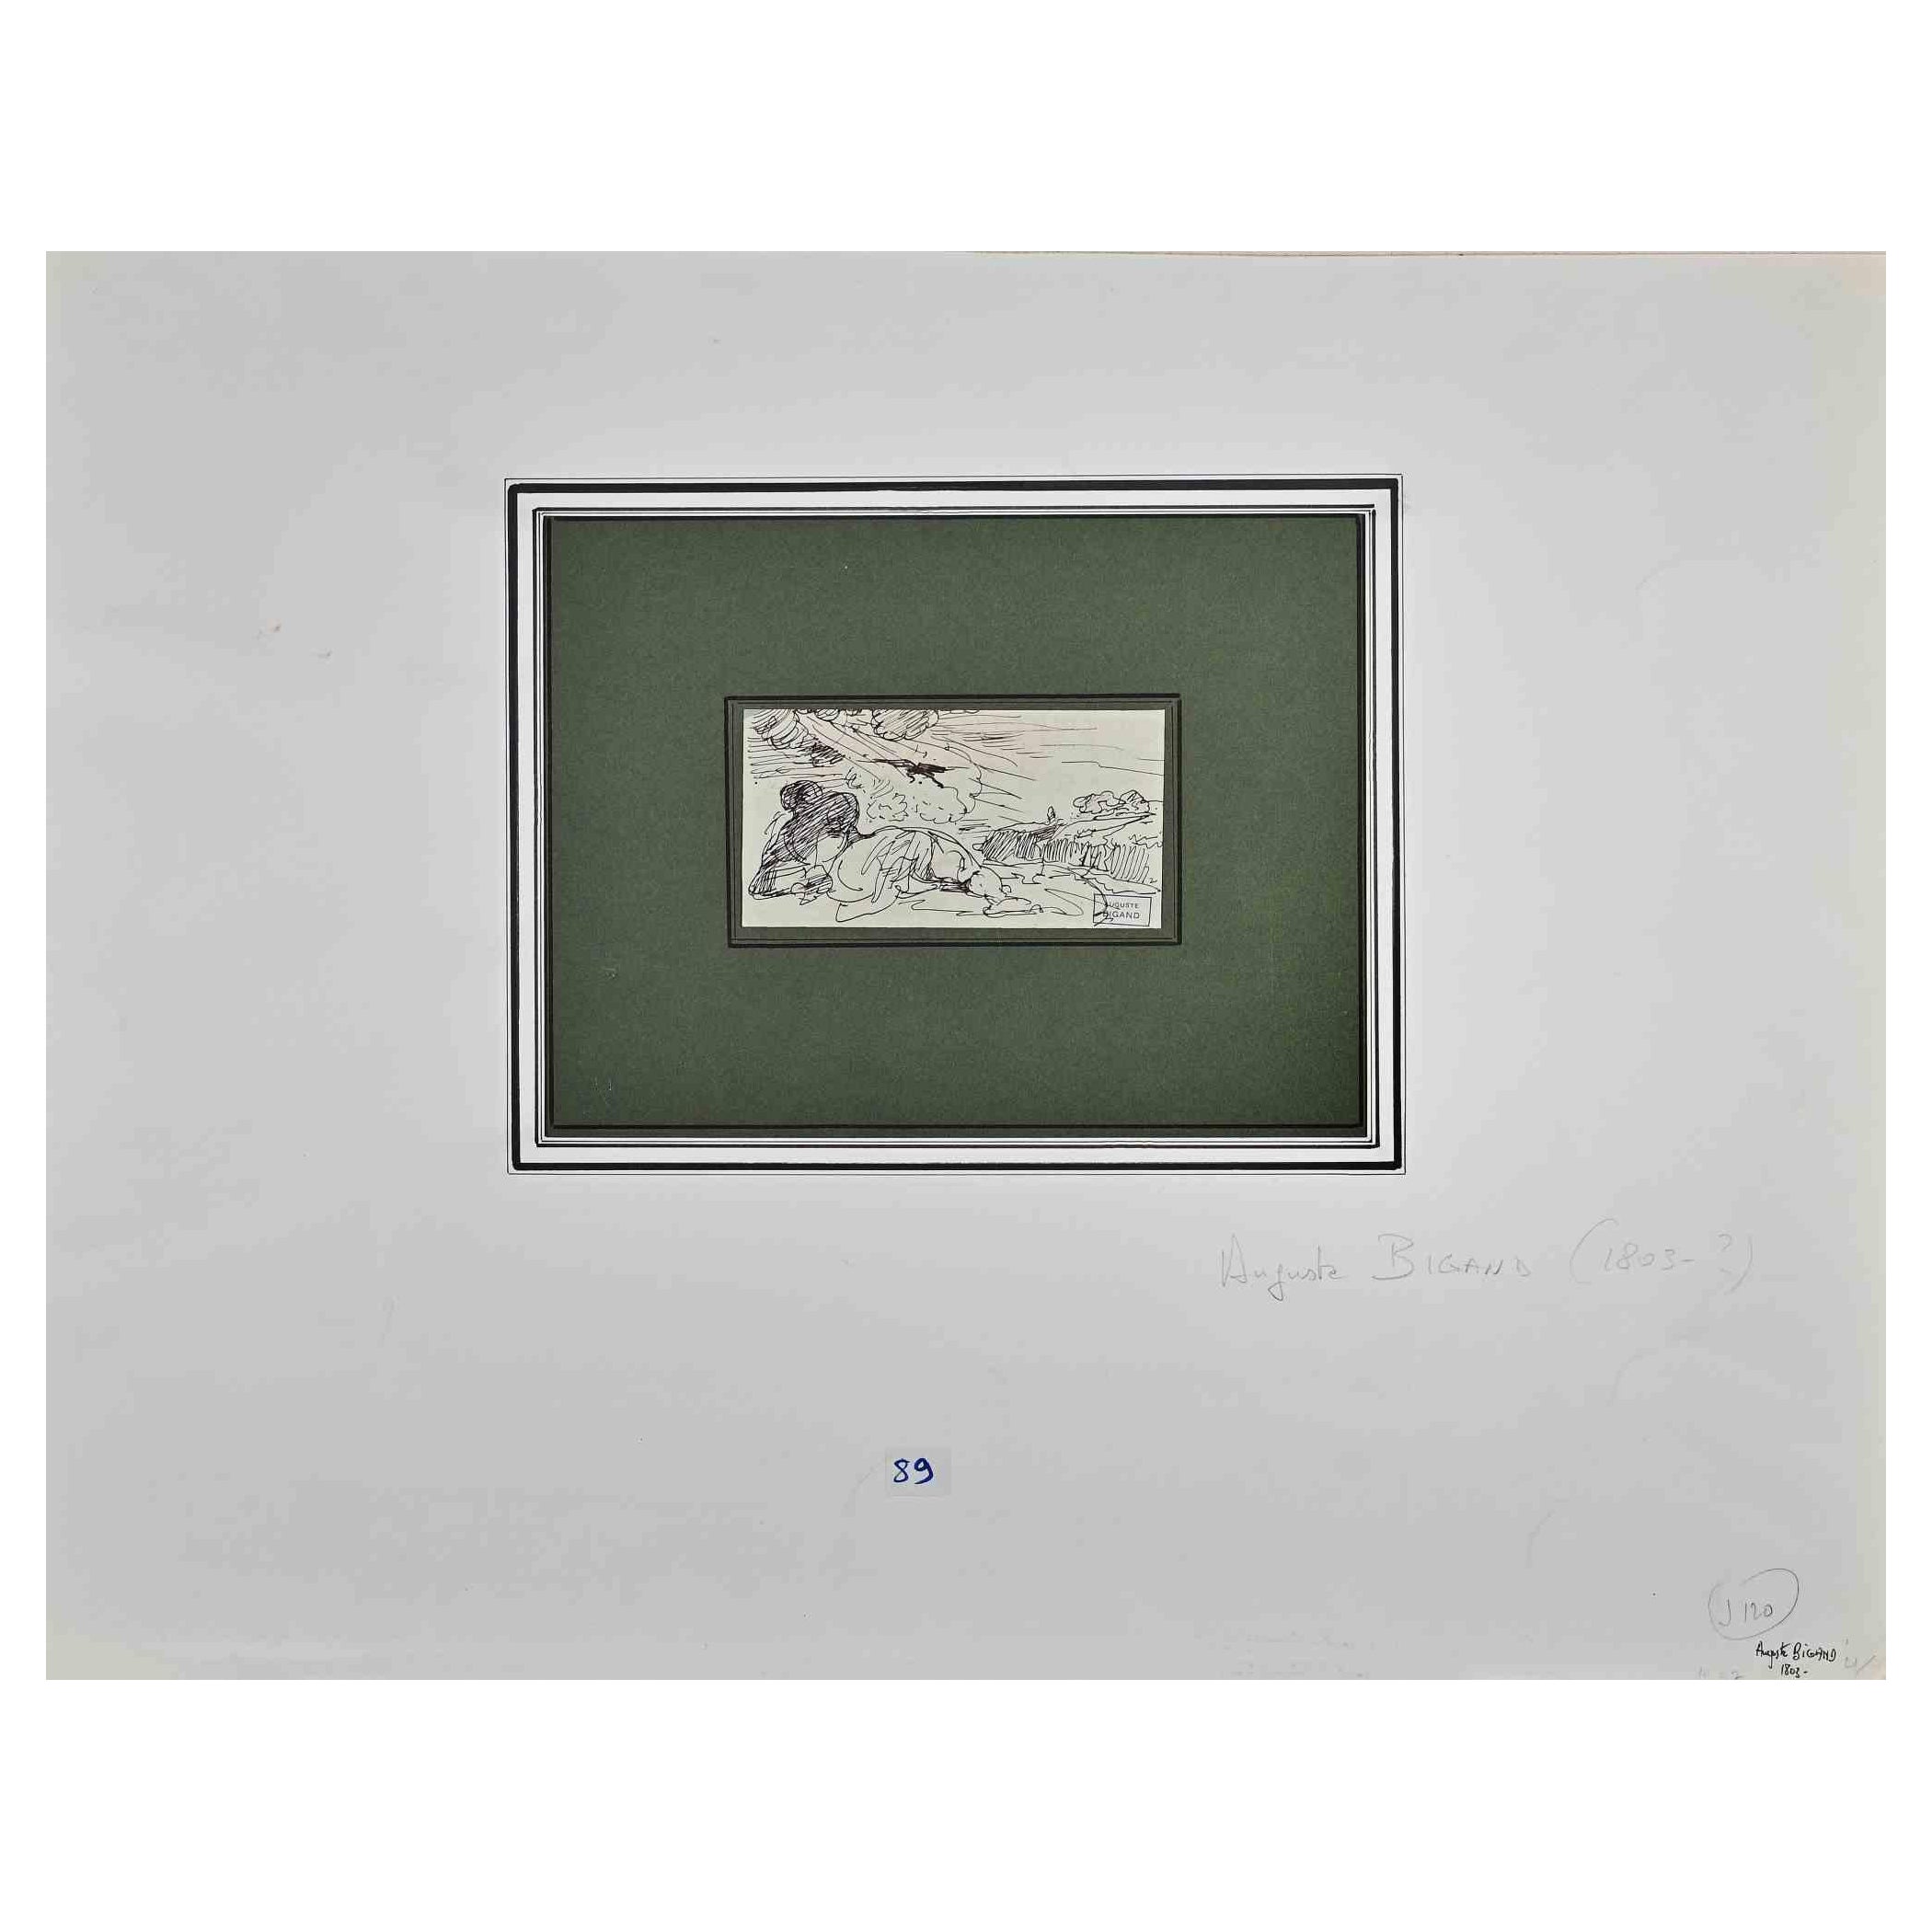 Landscape is an Original China Ink Drawing realized by Auguste Bigand (1803-1875).

Good condition included a green and white cardboard passpartout (50x65 cm).

Stamp Signed on the lower right corner.

Auguste Bigand born in Champlan on June 2 ,